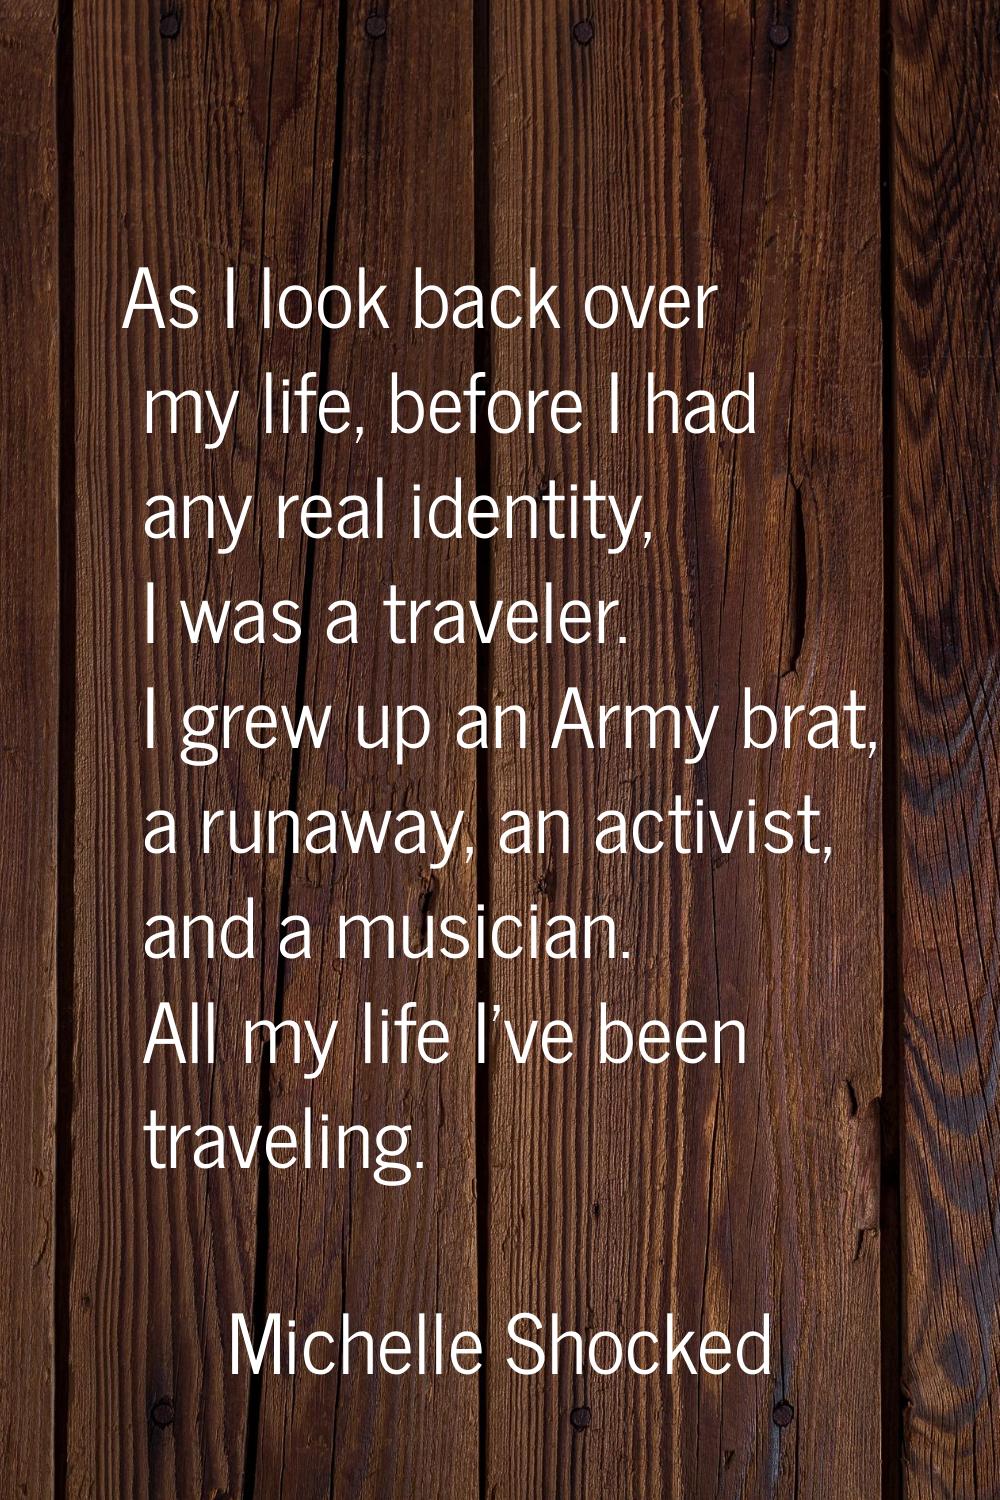 As I look back over my life, before I had any real identity, I was a traveler. I grew up an Army br